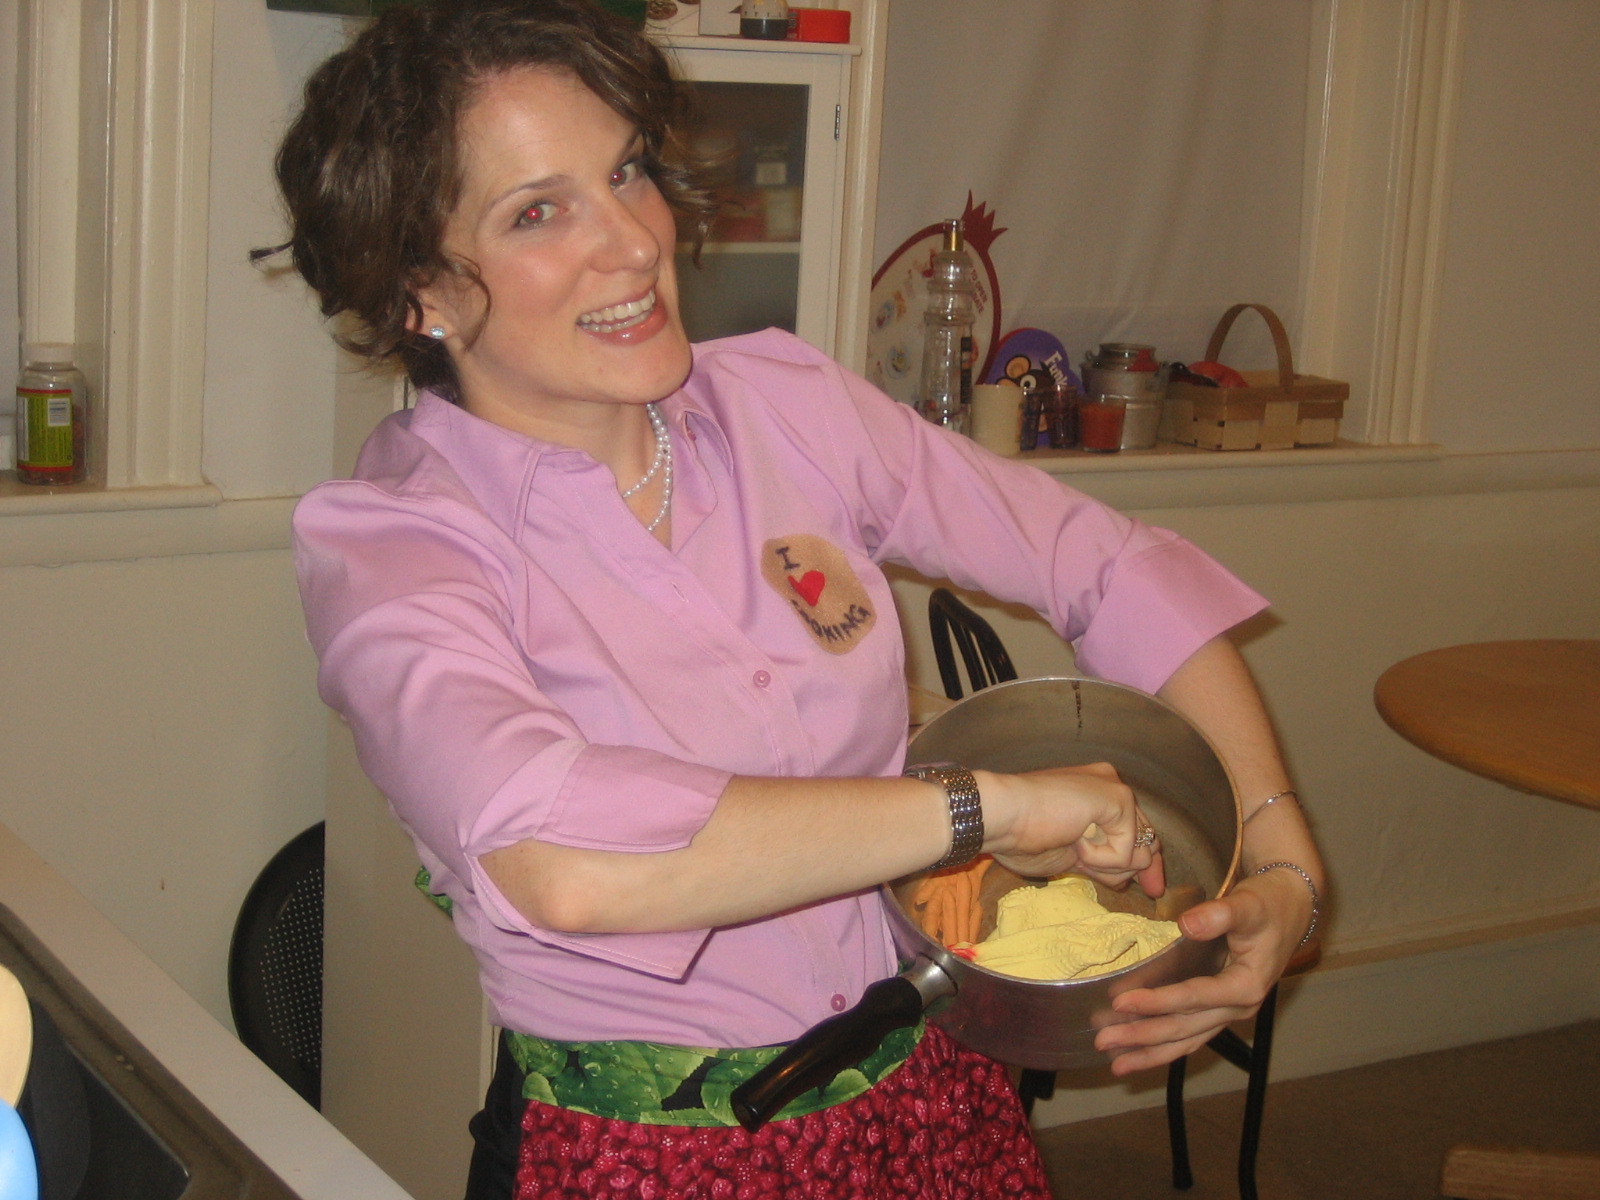 Fortunately just days before the Halloween party we went to, I came up with my costume: Julia Child!